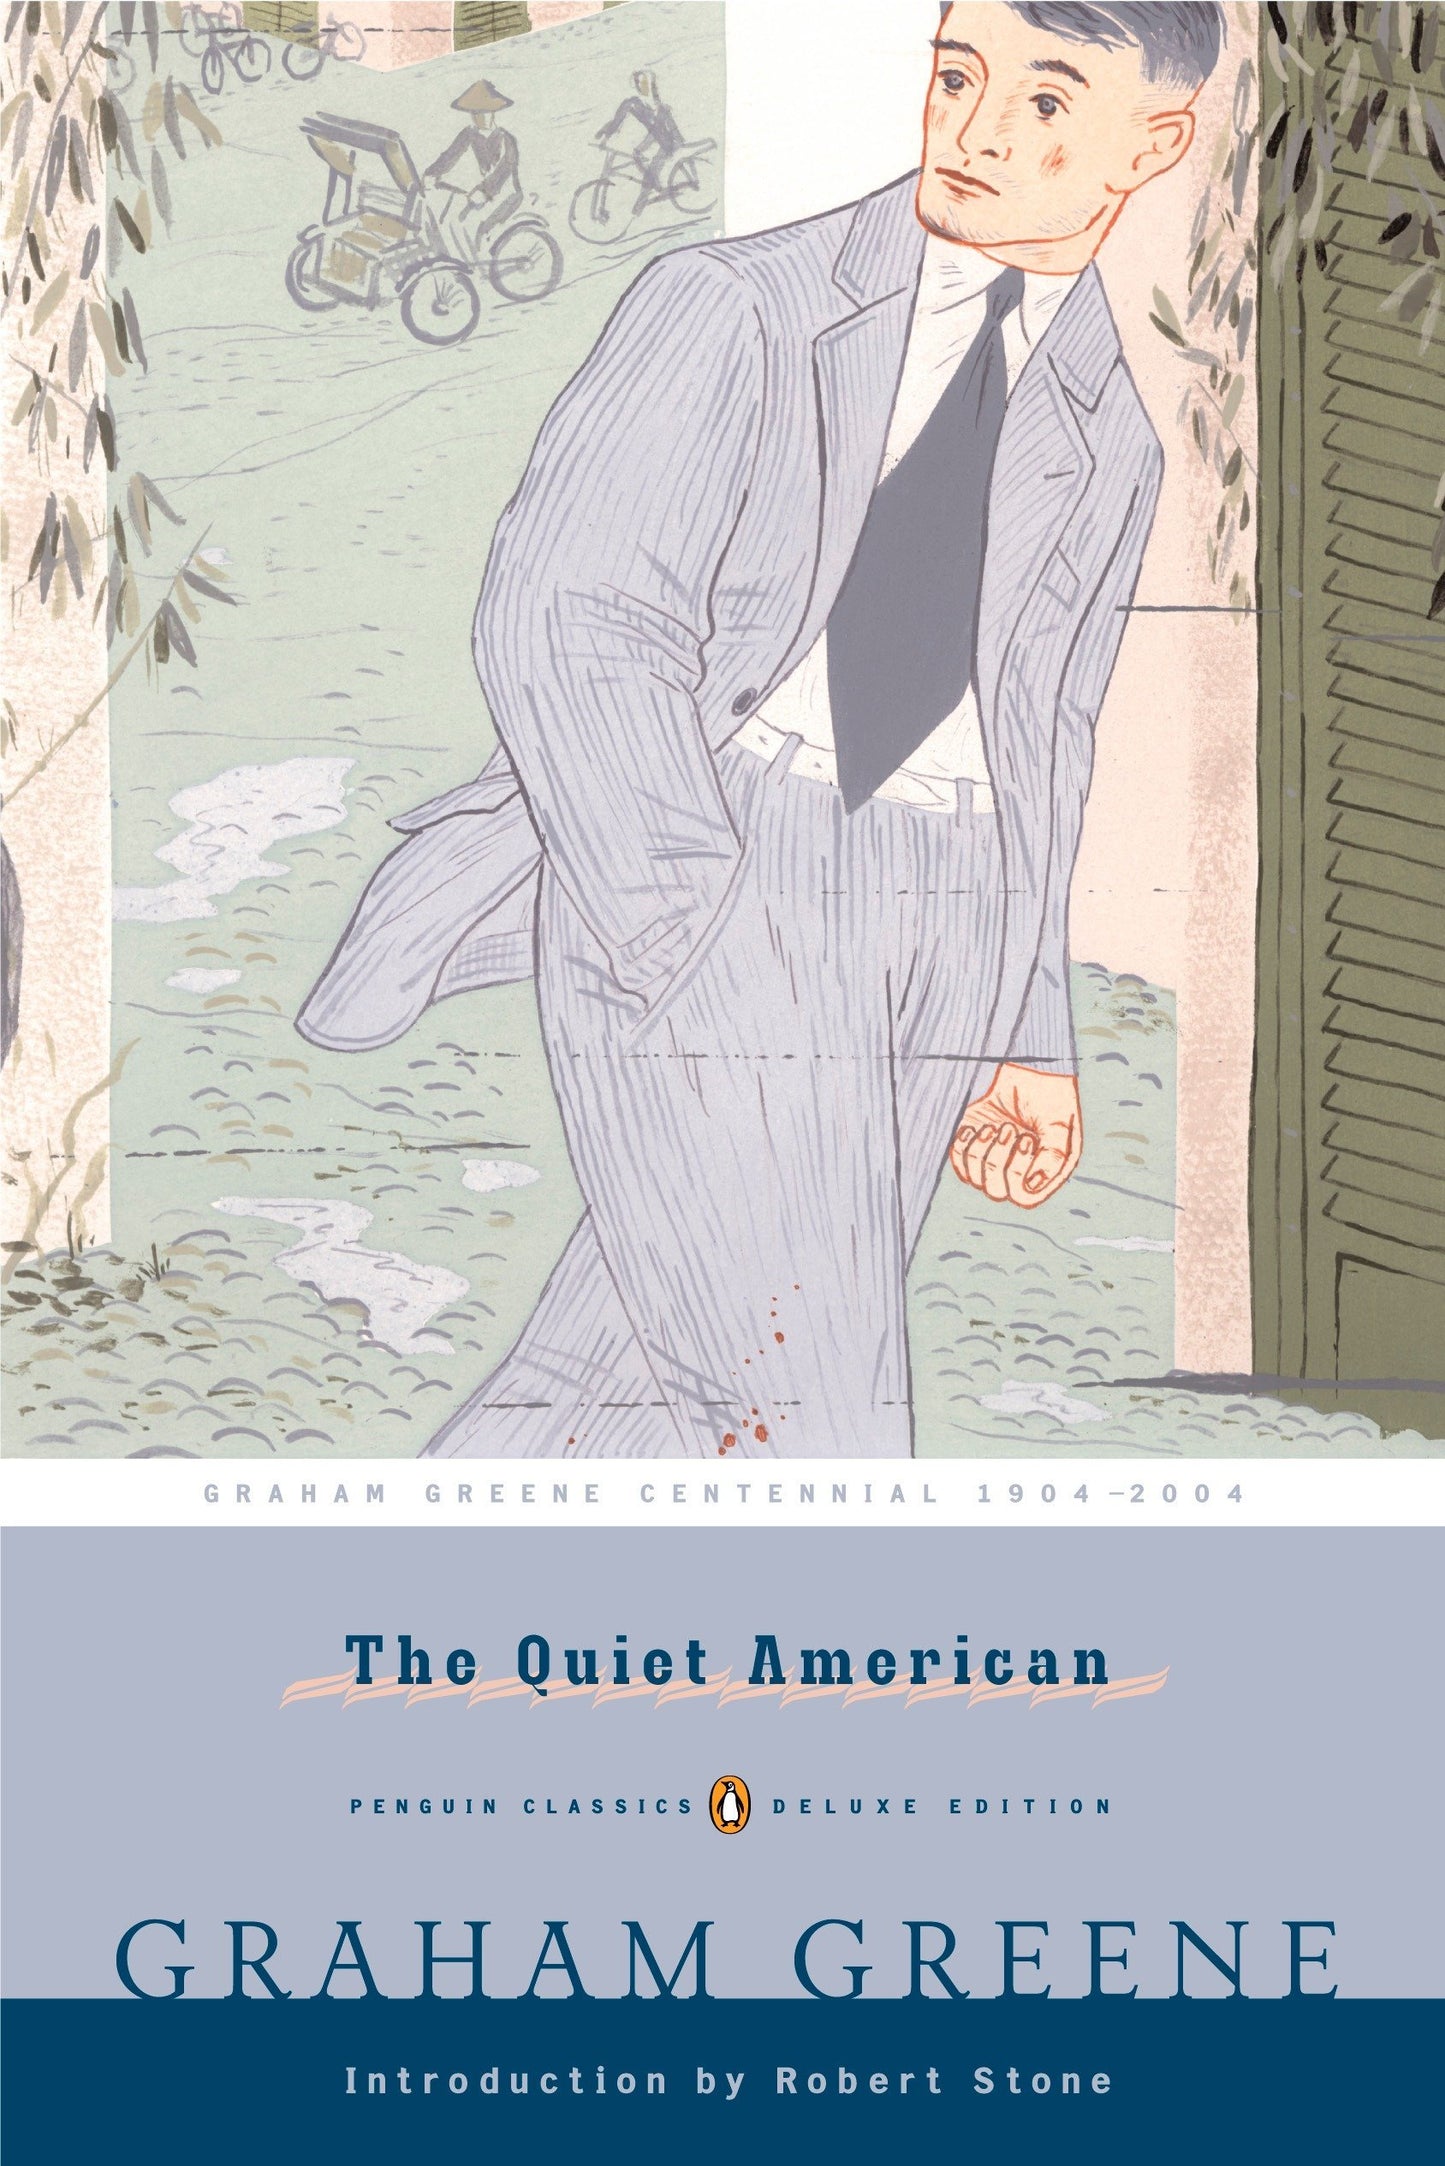 The Quiet American, by Graham Greene